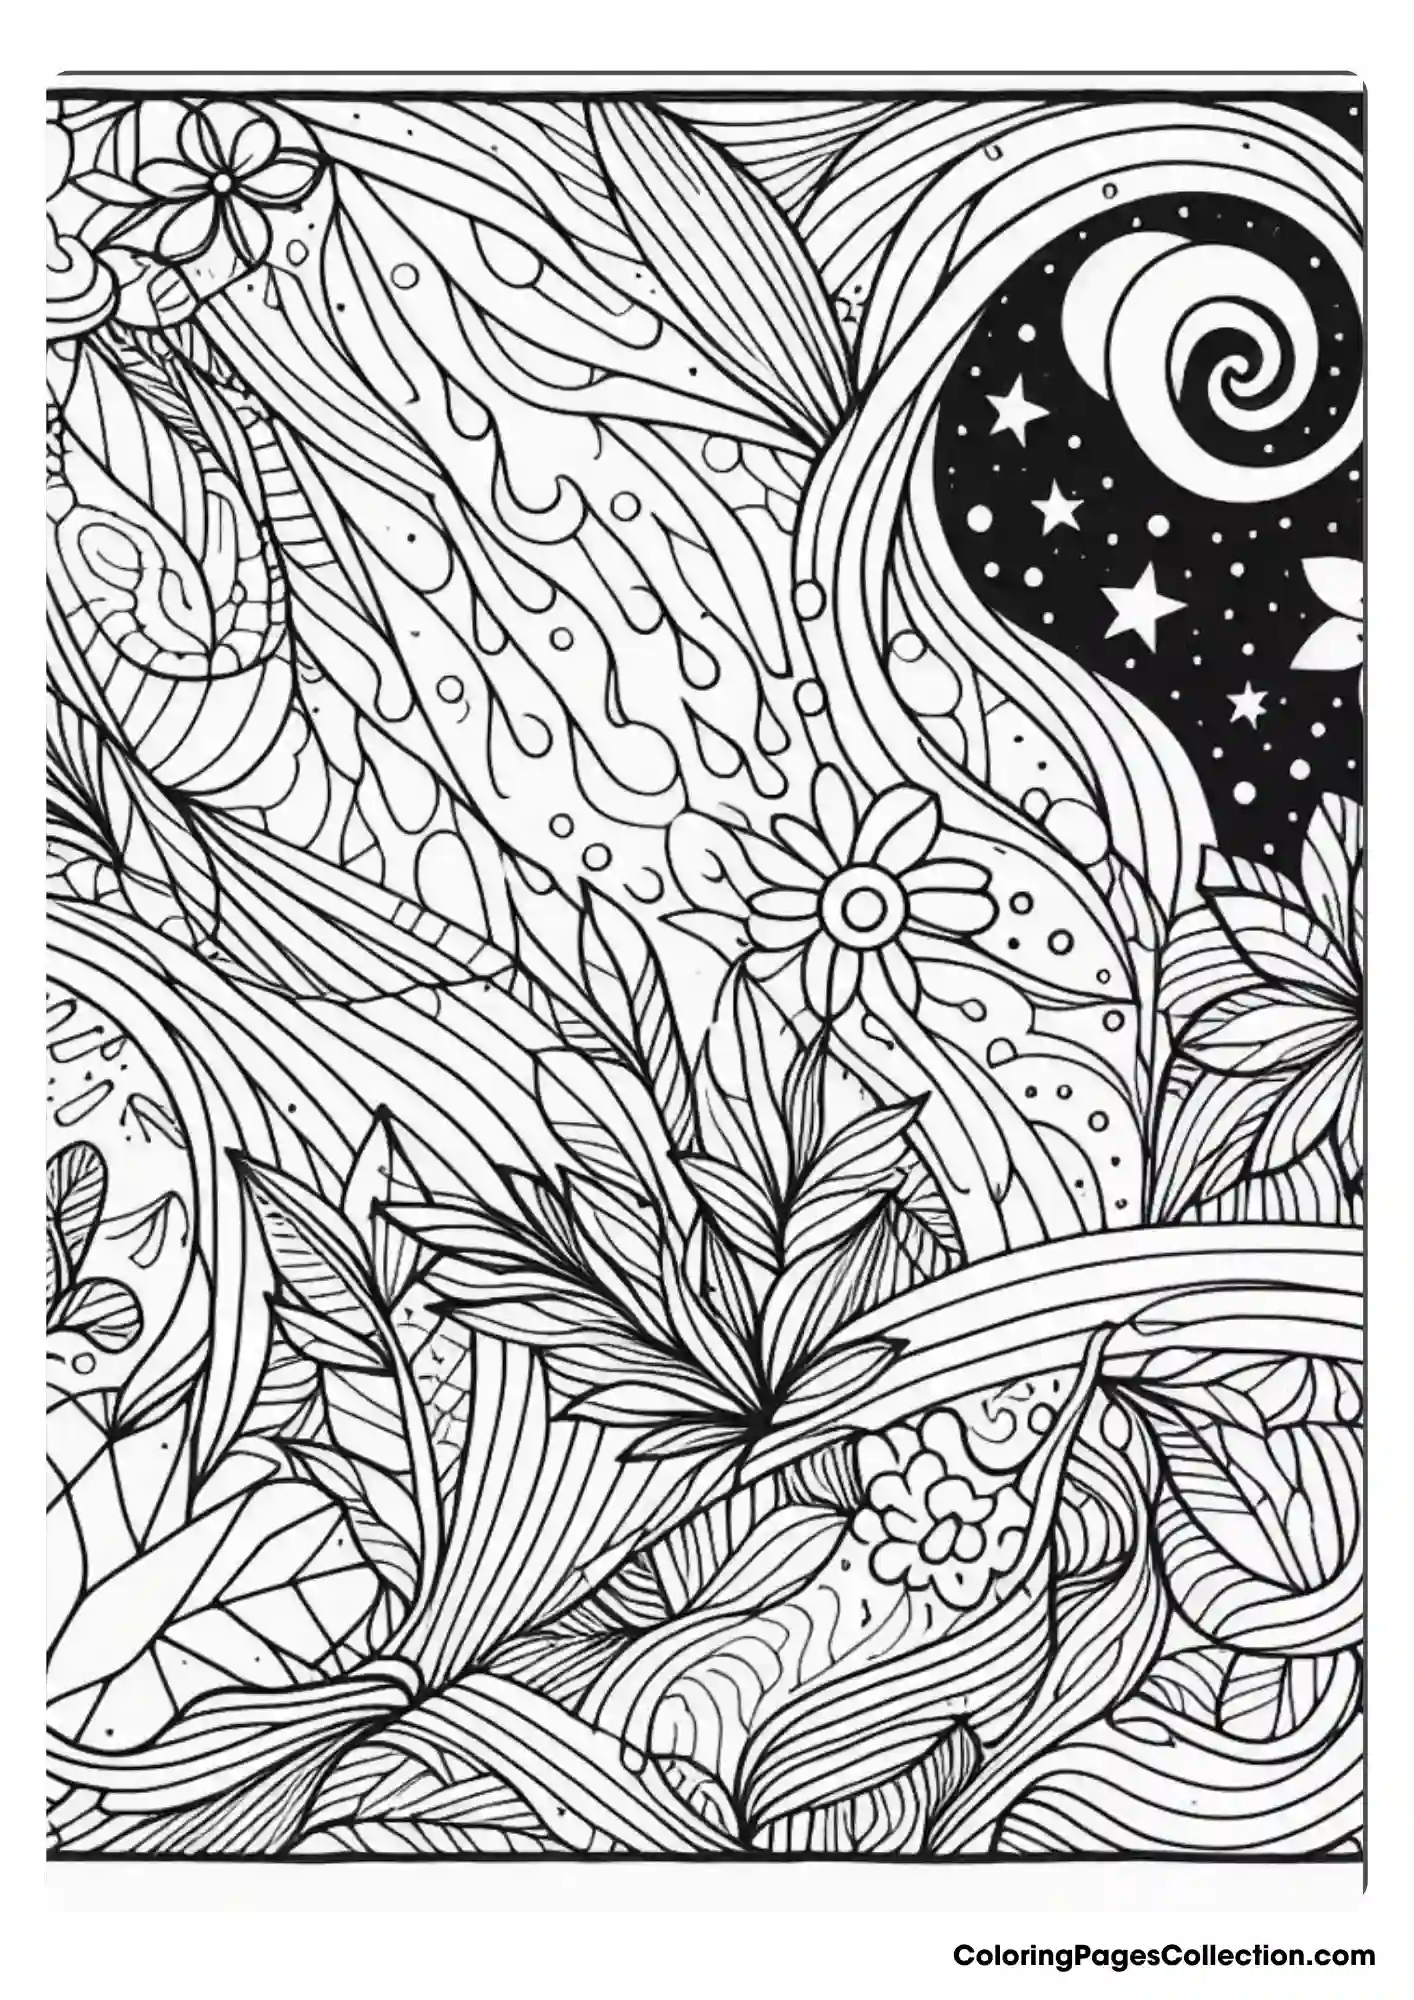 Therapeutic Coloring Page